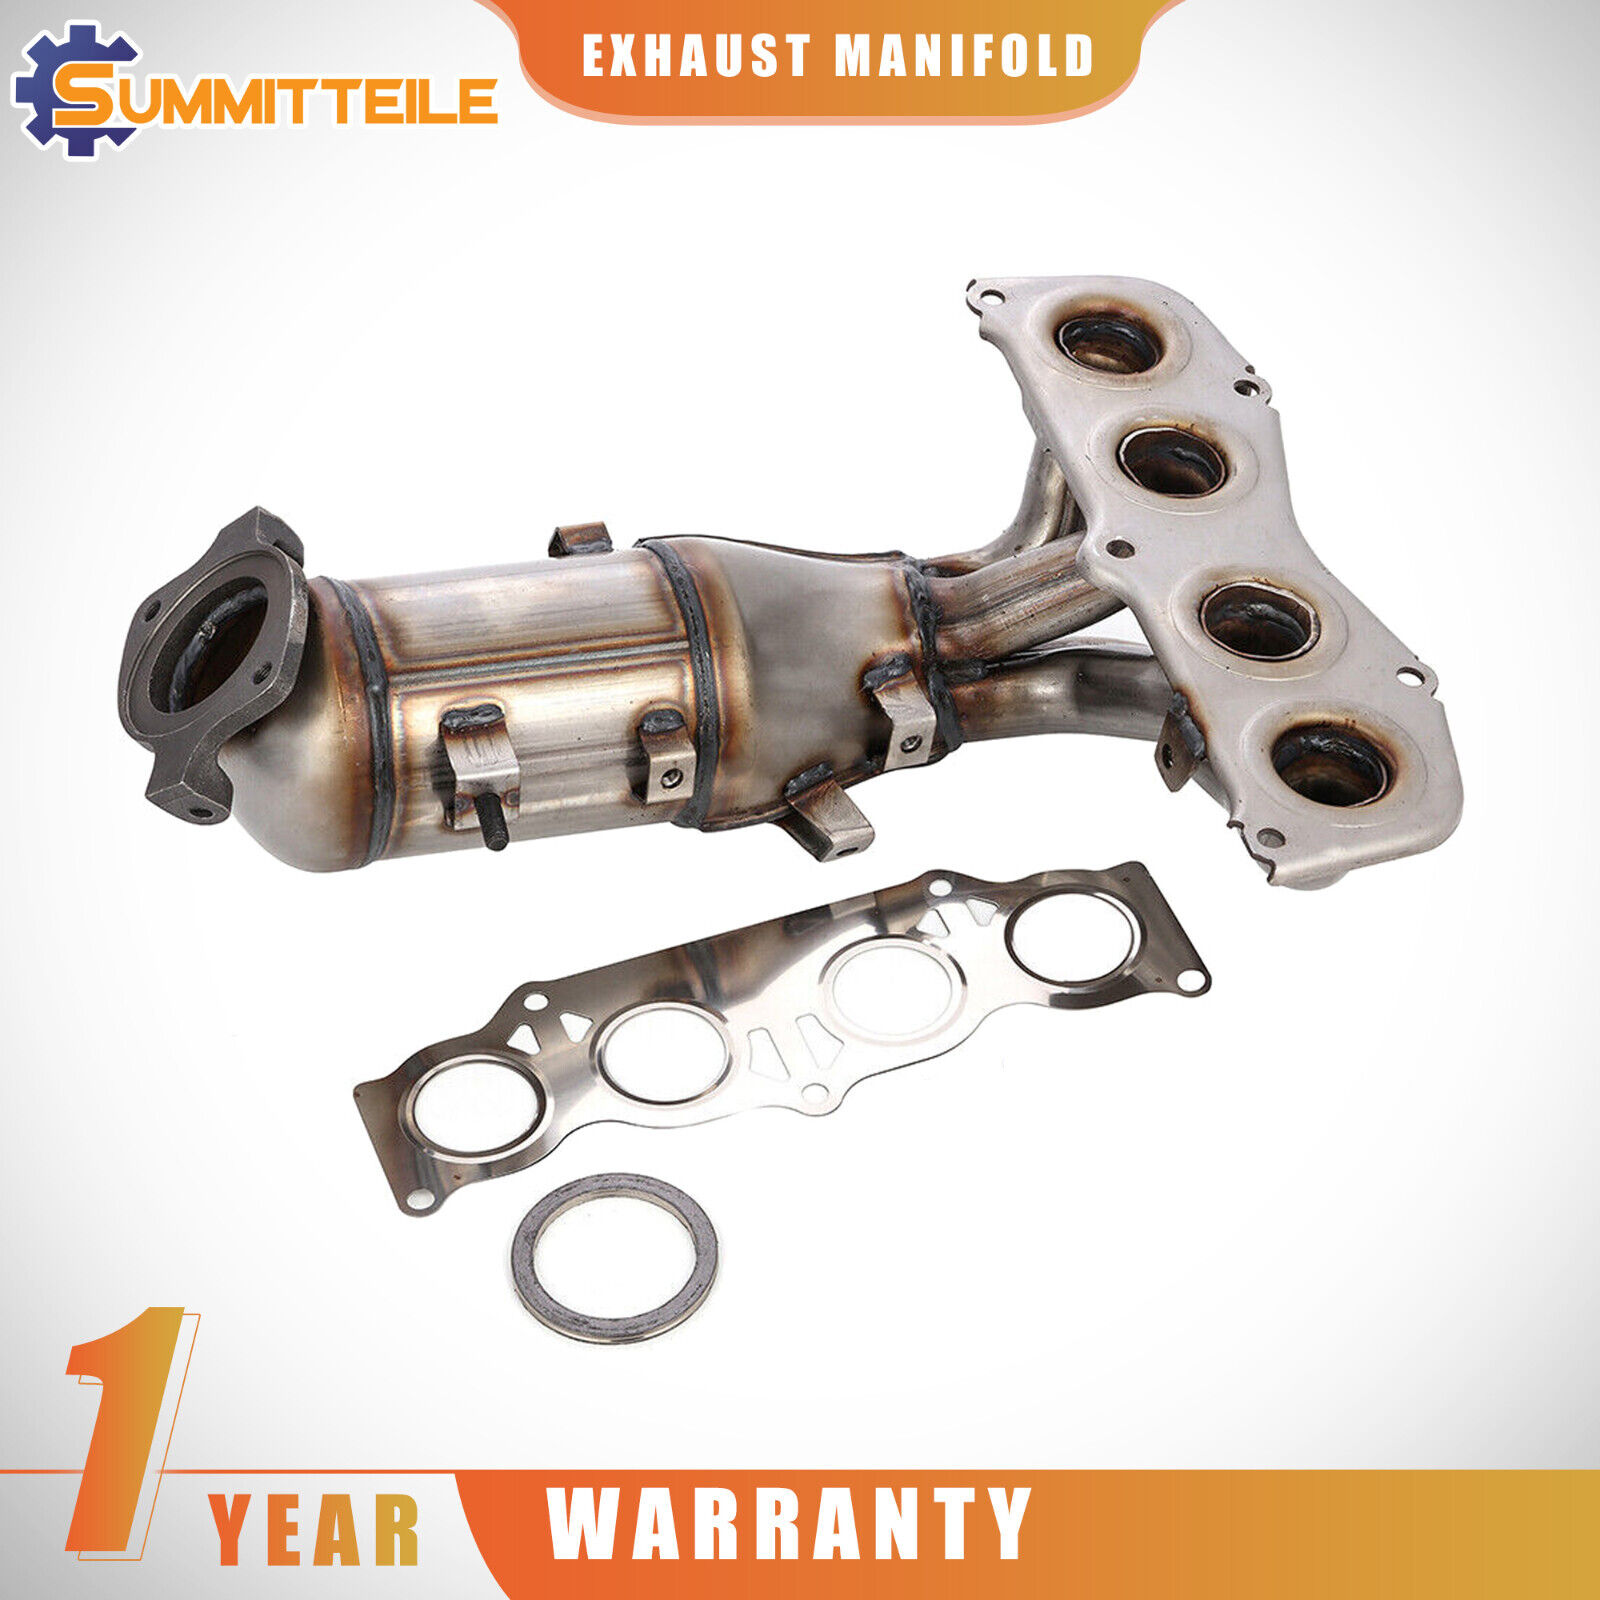 Steel Exhaust Manifold W/ Catalytic Converter For 2002-2006 Camry Solara 674-811